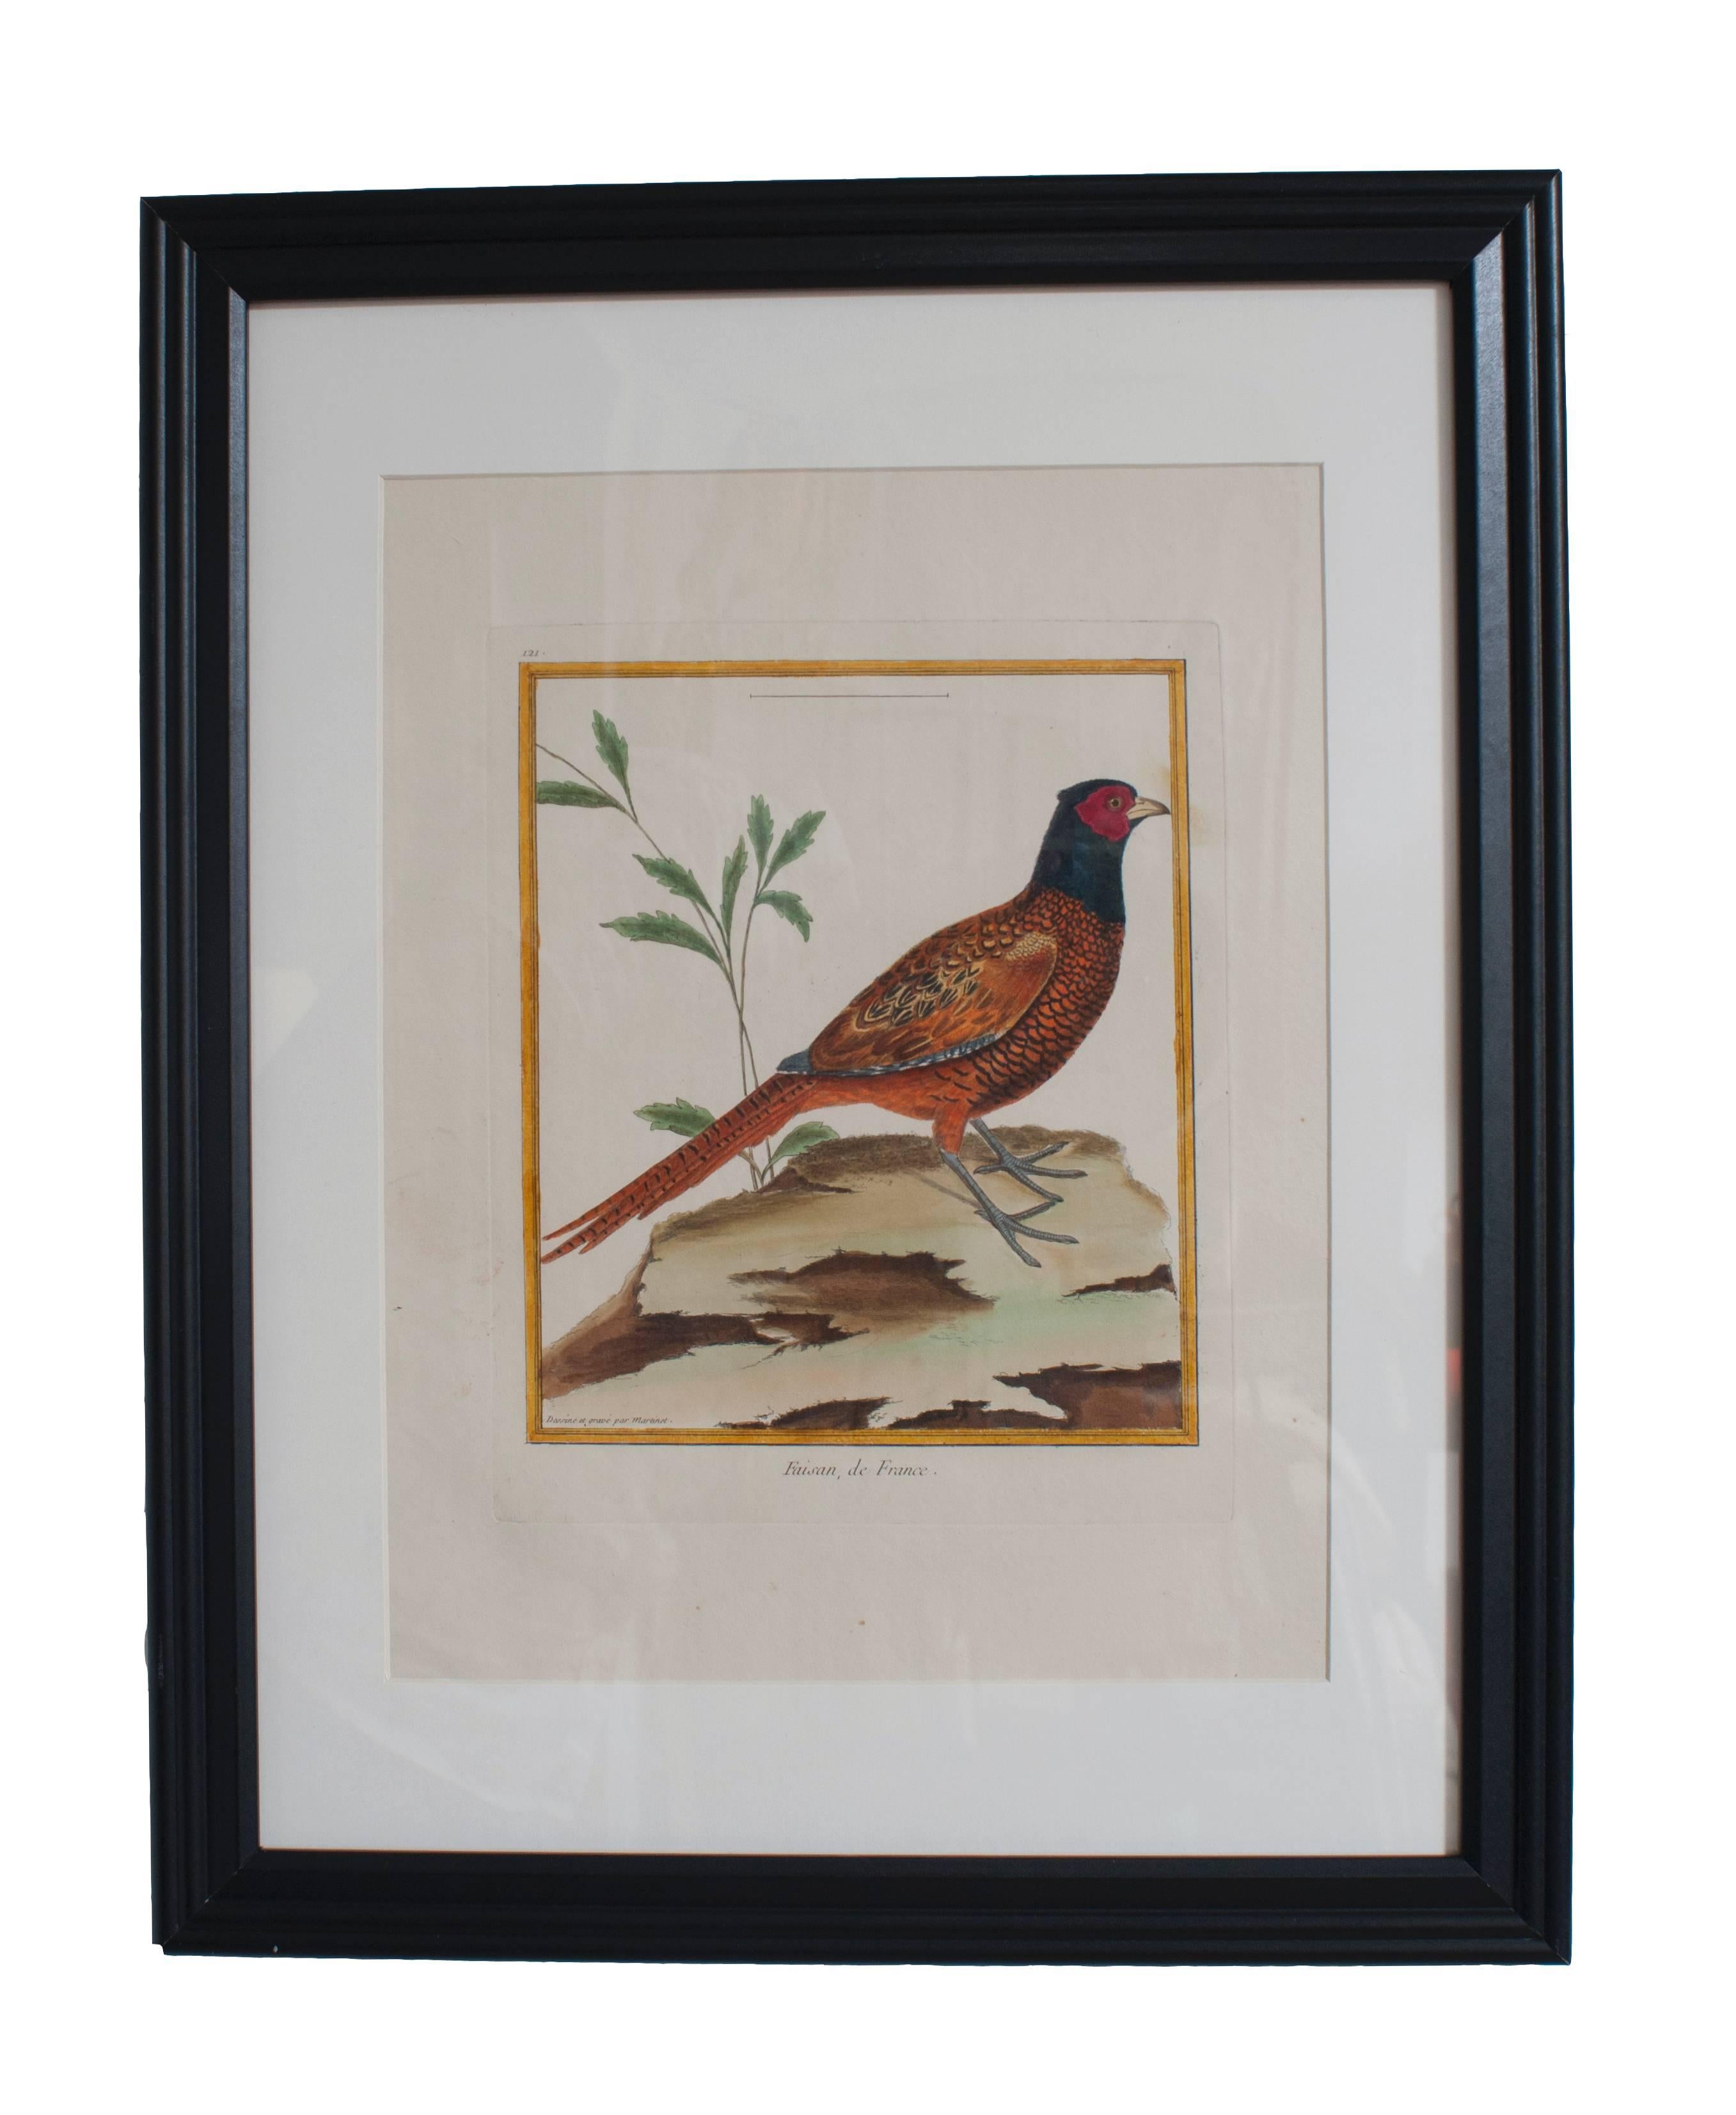 Ten hand colored engravings of birds in new frames and matting sold individually.  François Nicolas Martinet. 
Martinet engraved illustrations of birds 
for books by some of the most influential 
ornithologists in 18th-century France